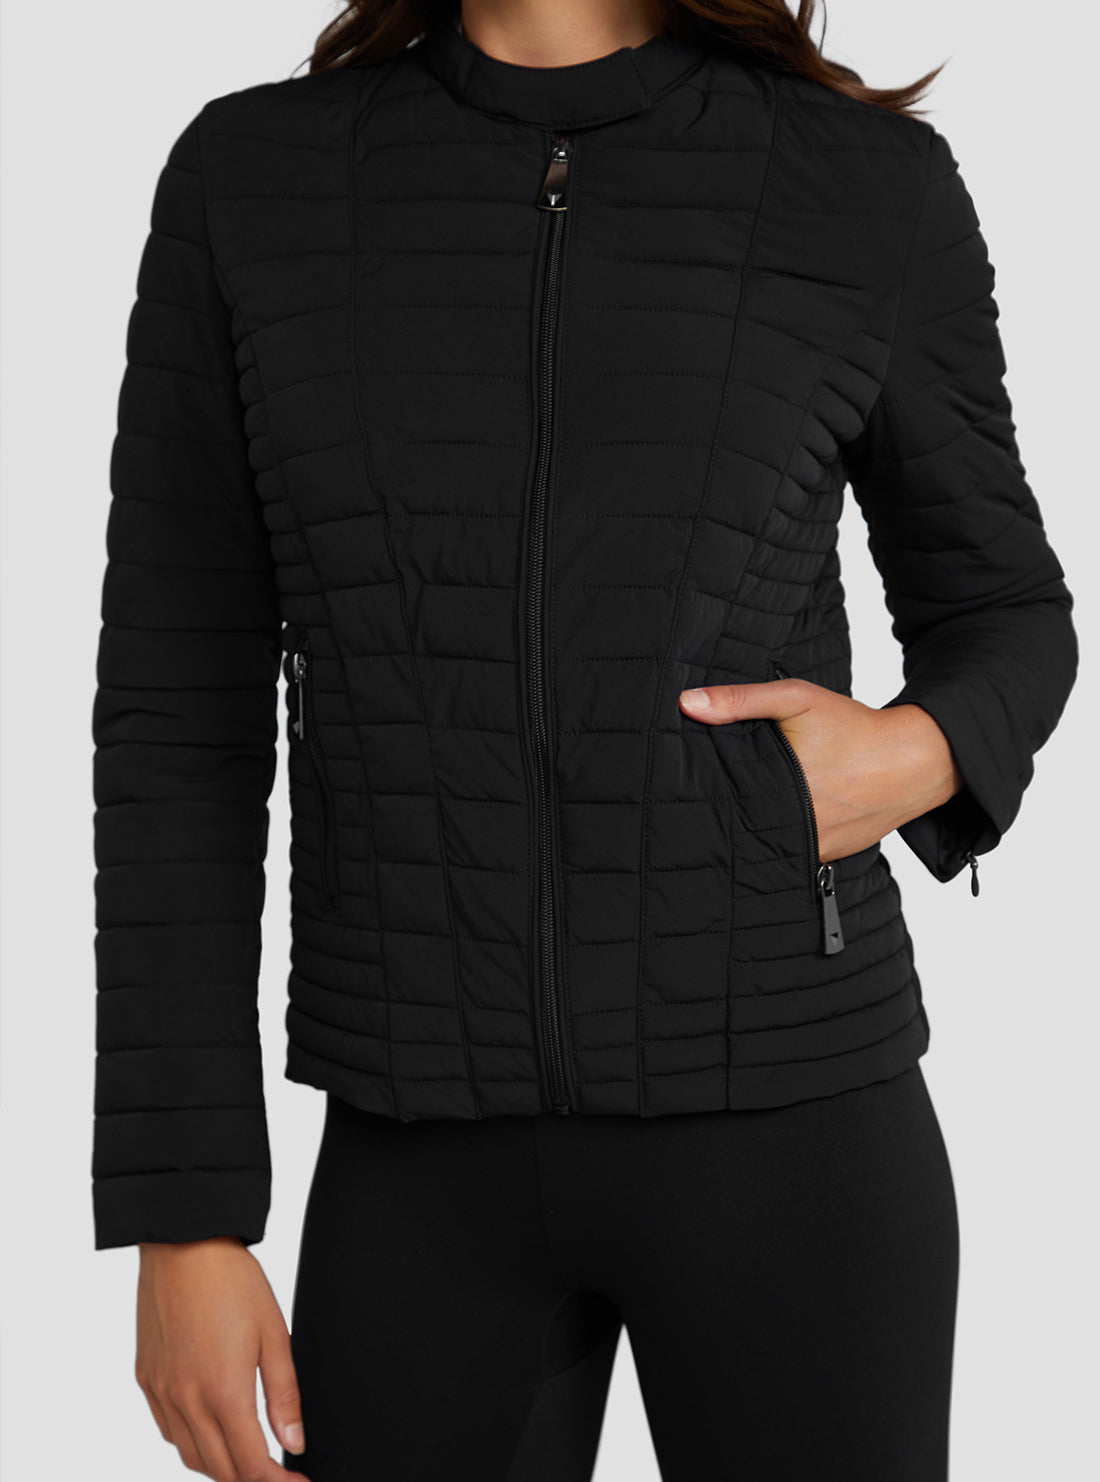 GUESS Women's Eco Black Vona Jacket W2YL1IW6NW2 Detail View